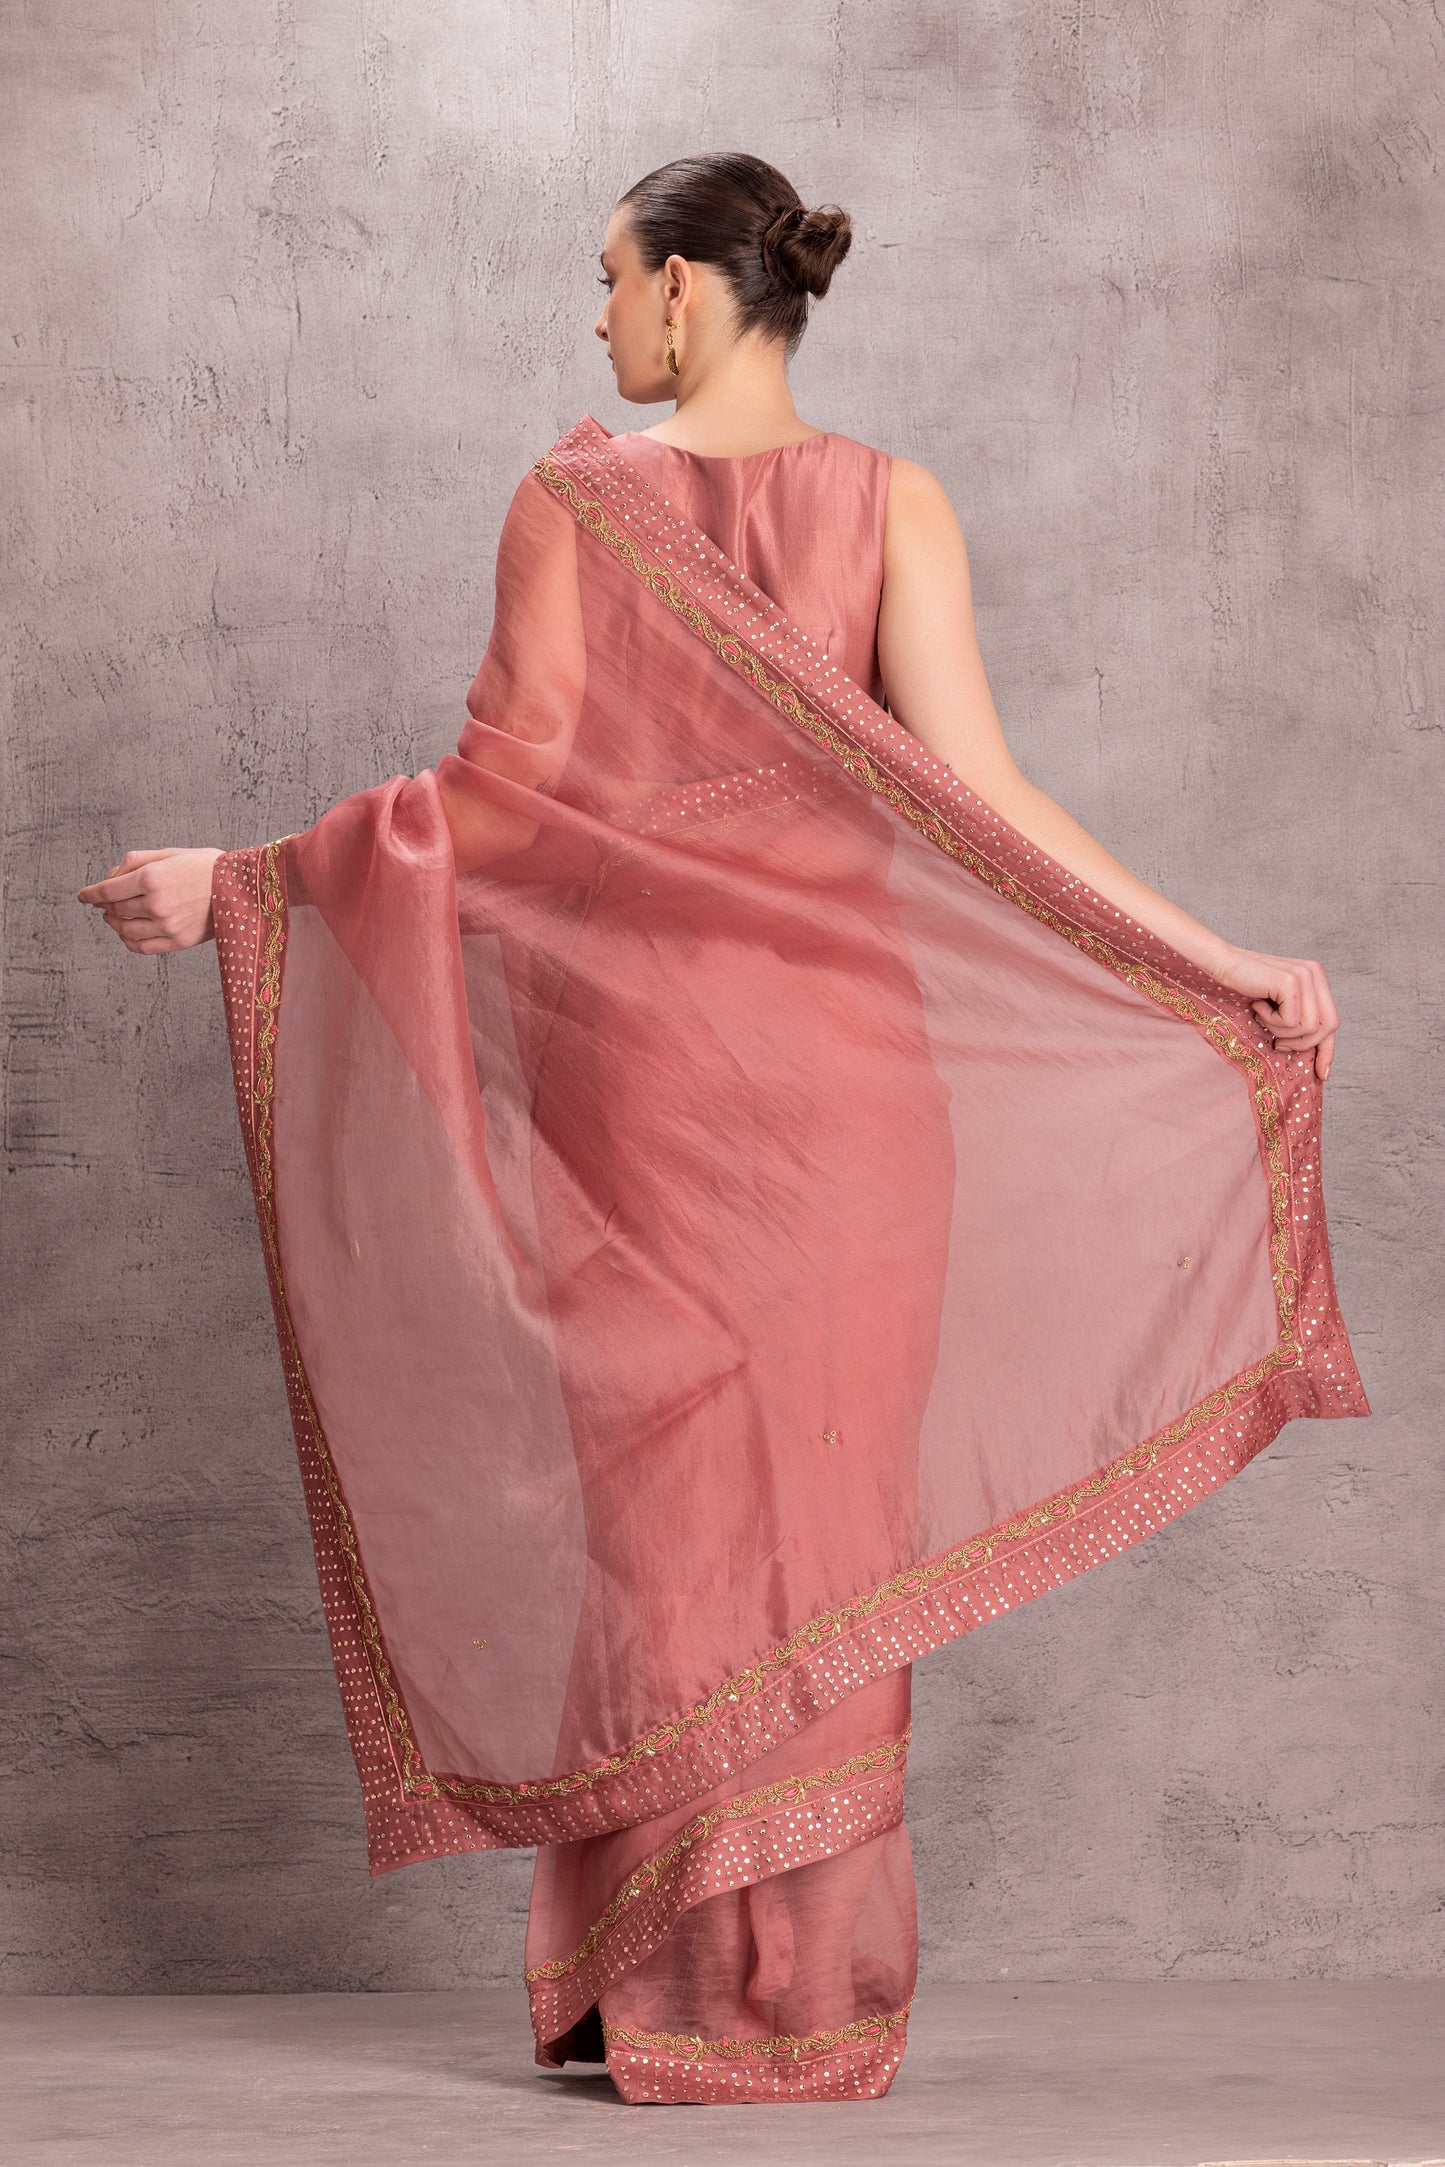 Dusty Pink Organza Saree Comes With Silk Stitched Blouse & Organic Cotton Stitched Petticoat (3Pcs)